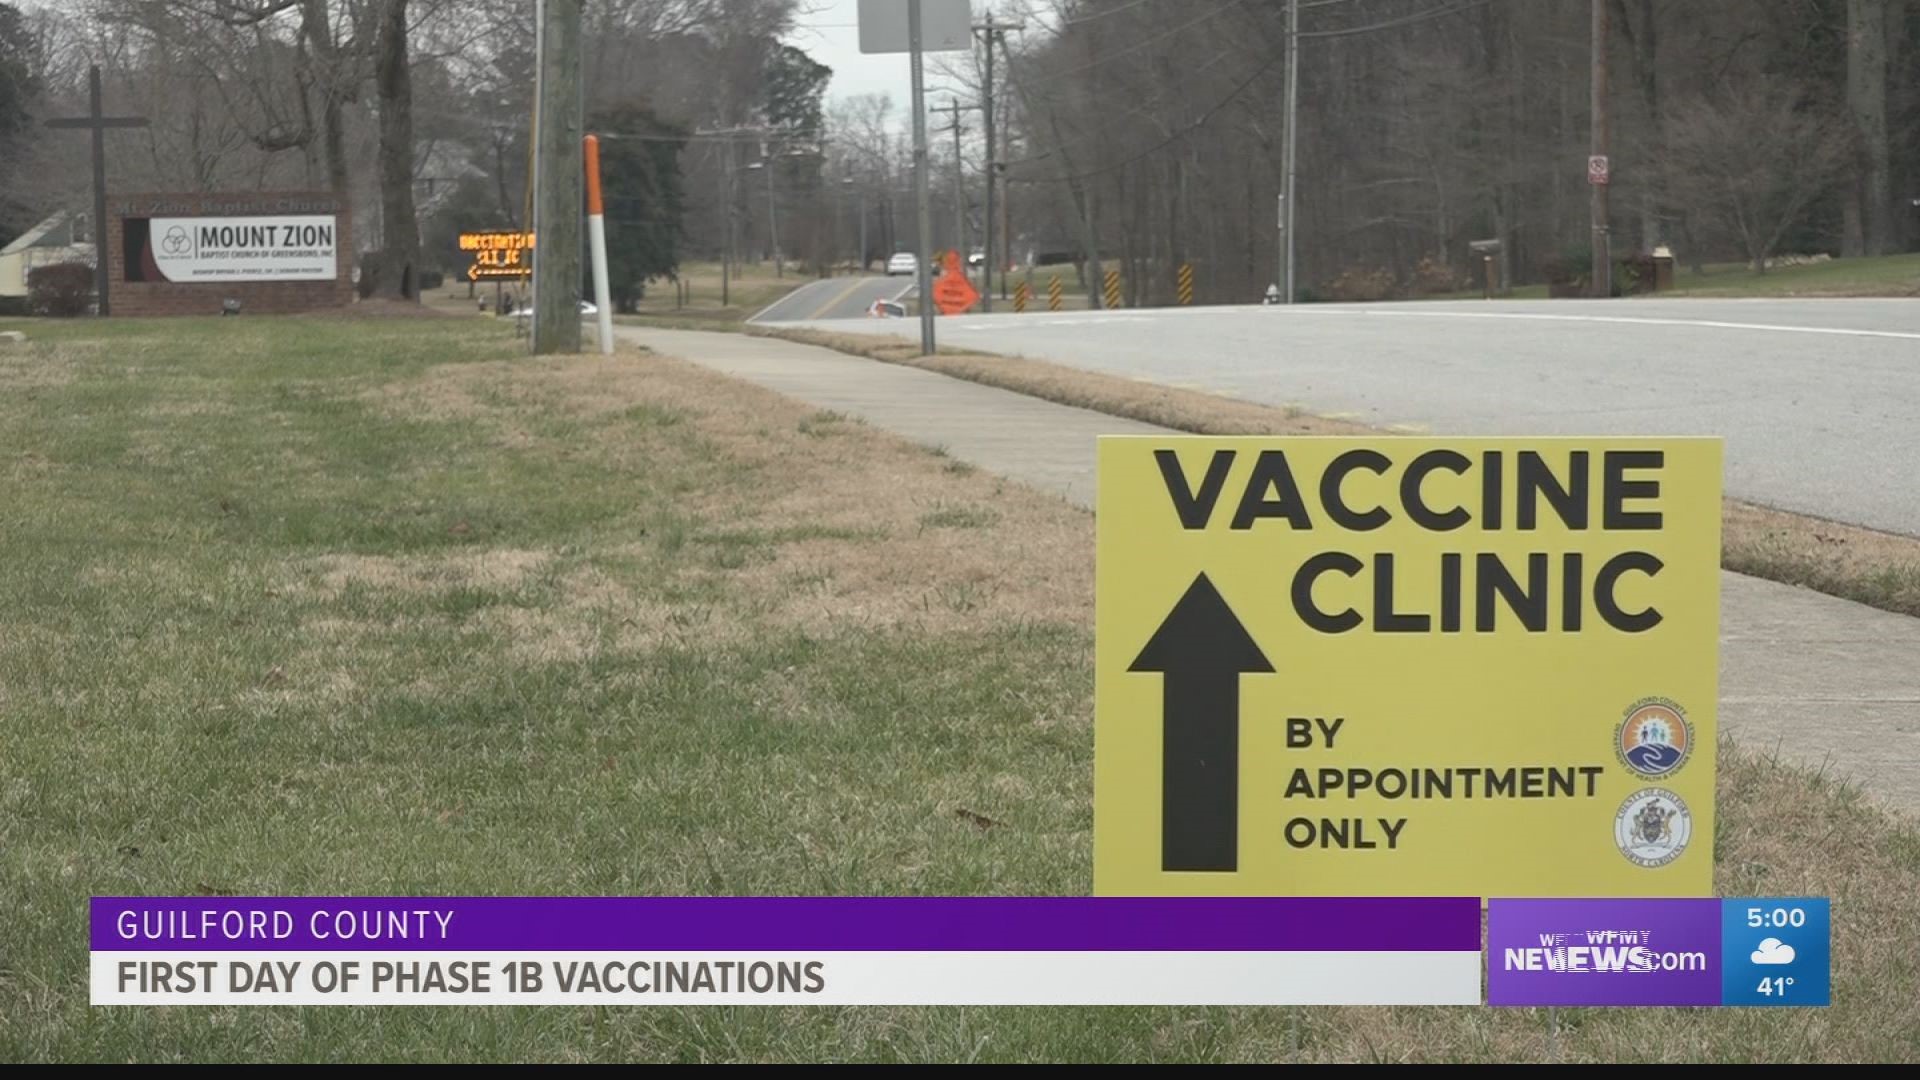 Guilford County Department of Public Health says all its vaccine appointments are filled through Thursday.